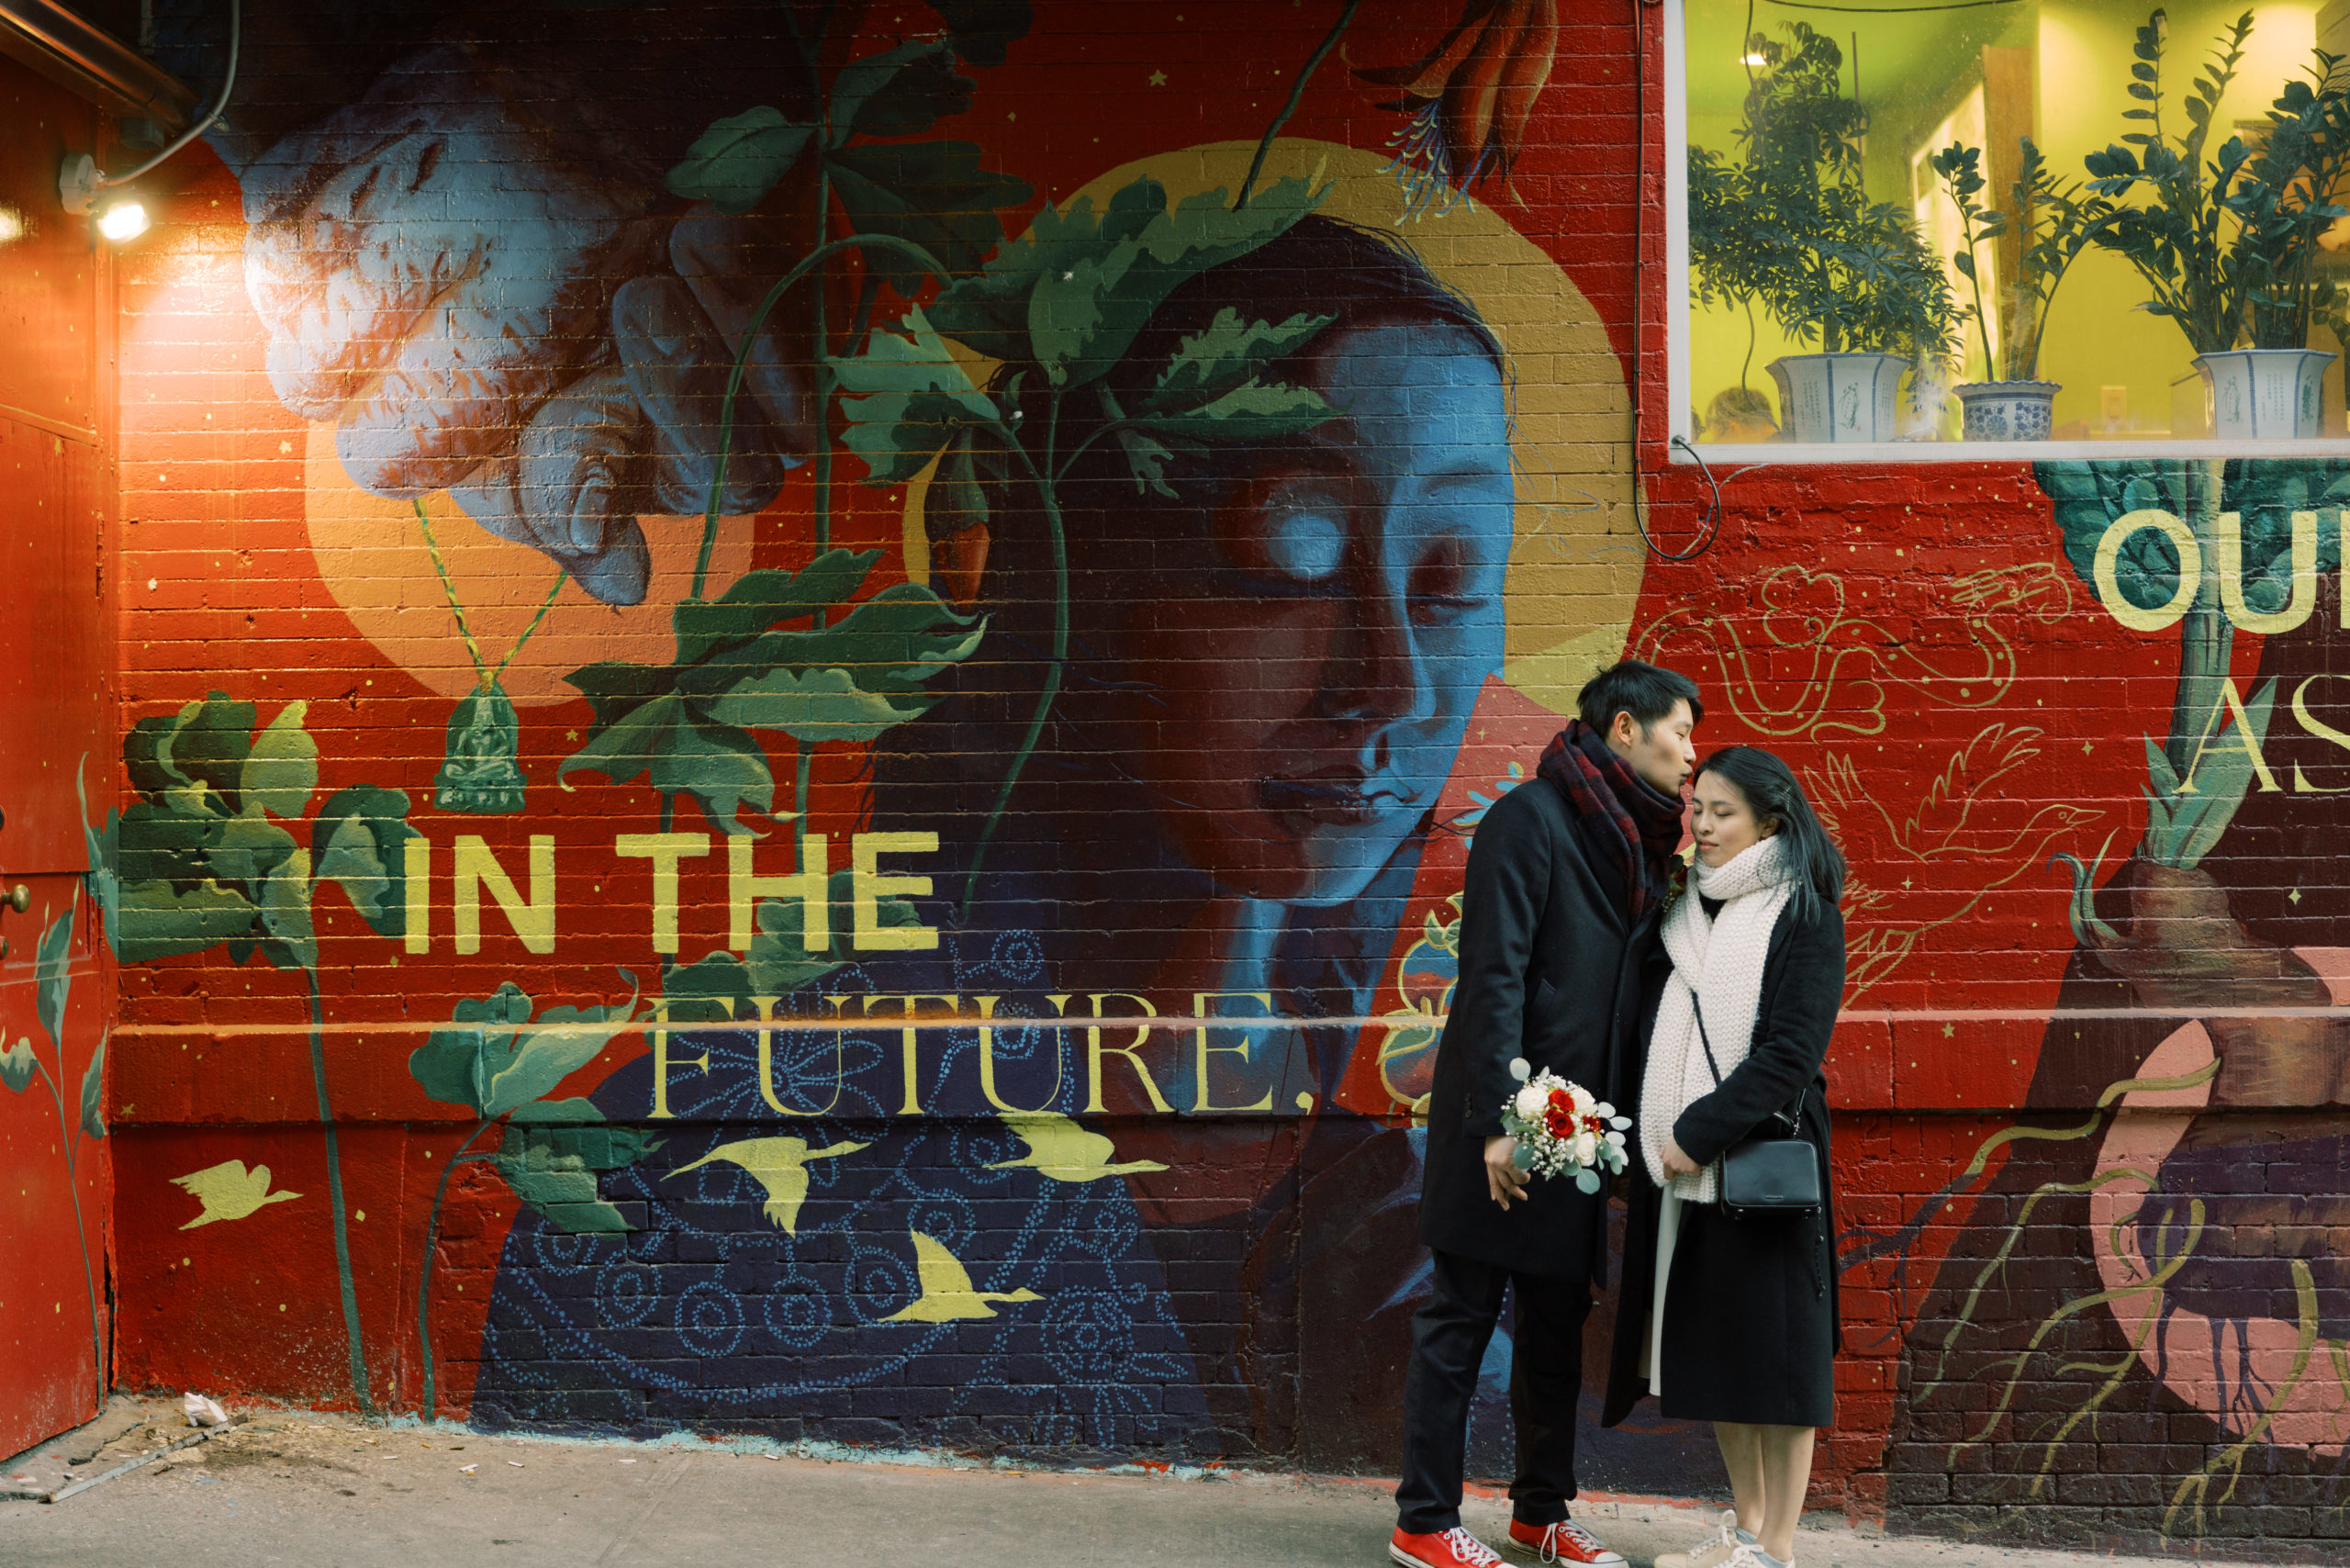 Editorial image of the newlyweds in front of a graffiti in New York. Image by Jenny Fu Studio